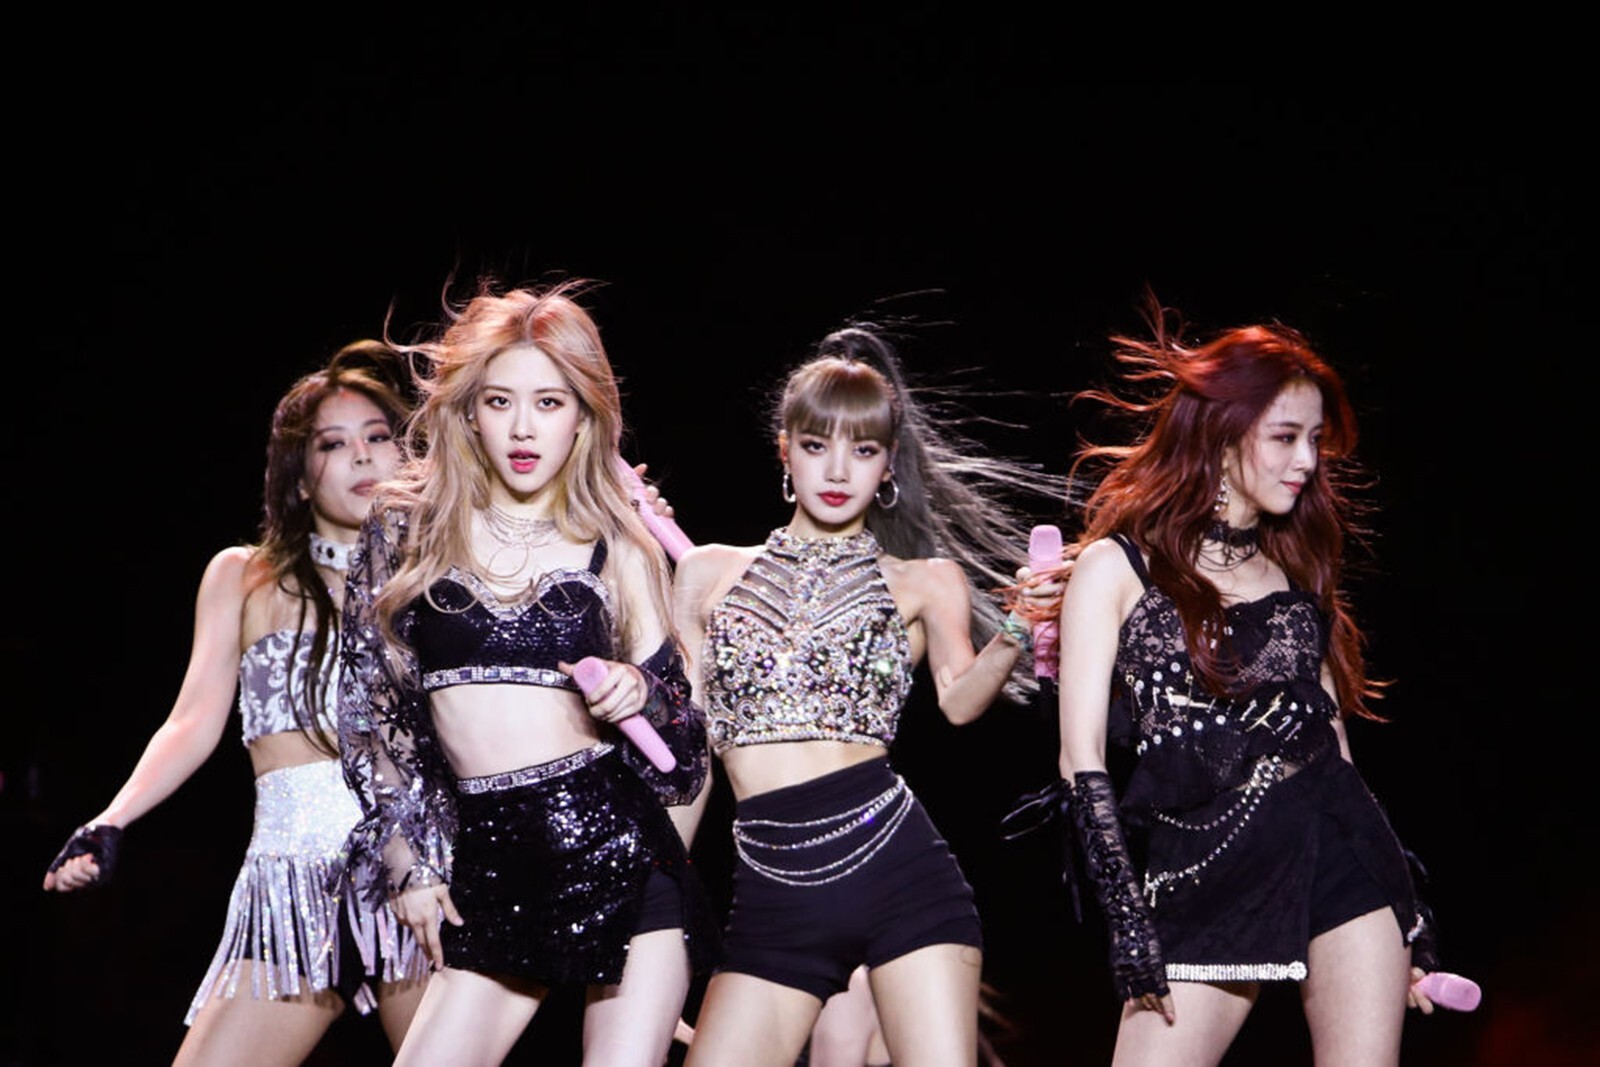 Blackpink’s Coachella performance rounds off the documentary, but in so many ways is just the beginning for the band. Photo: TNS